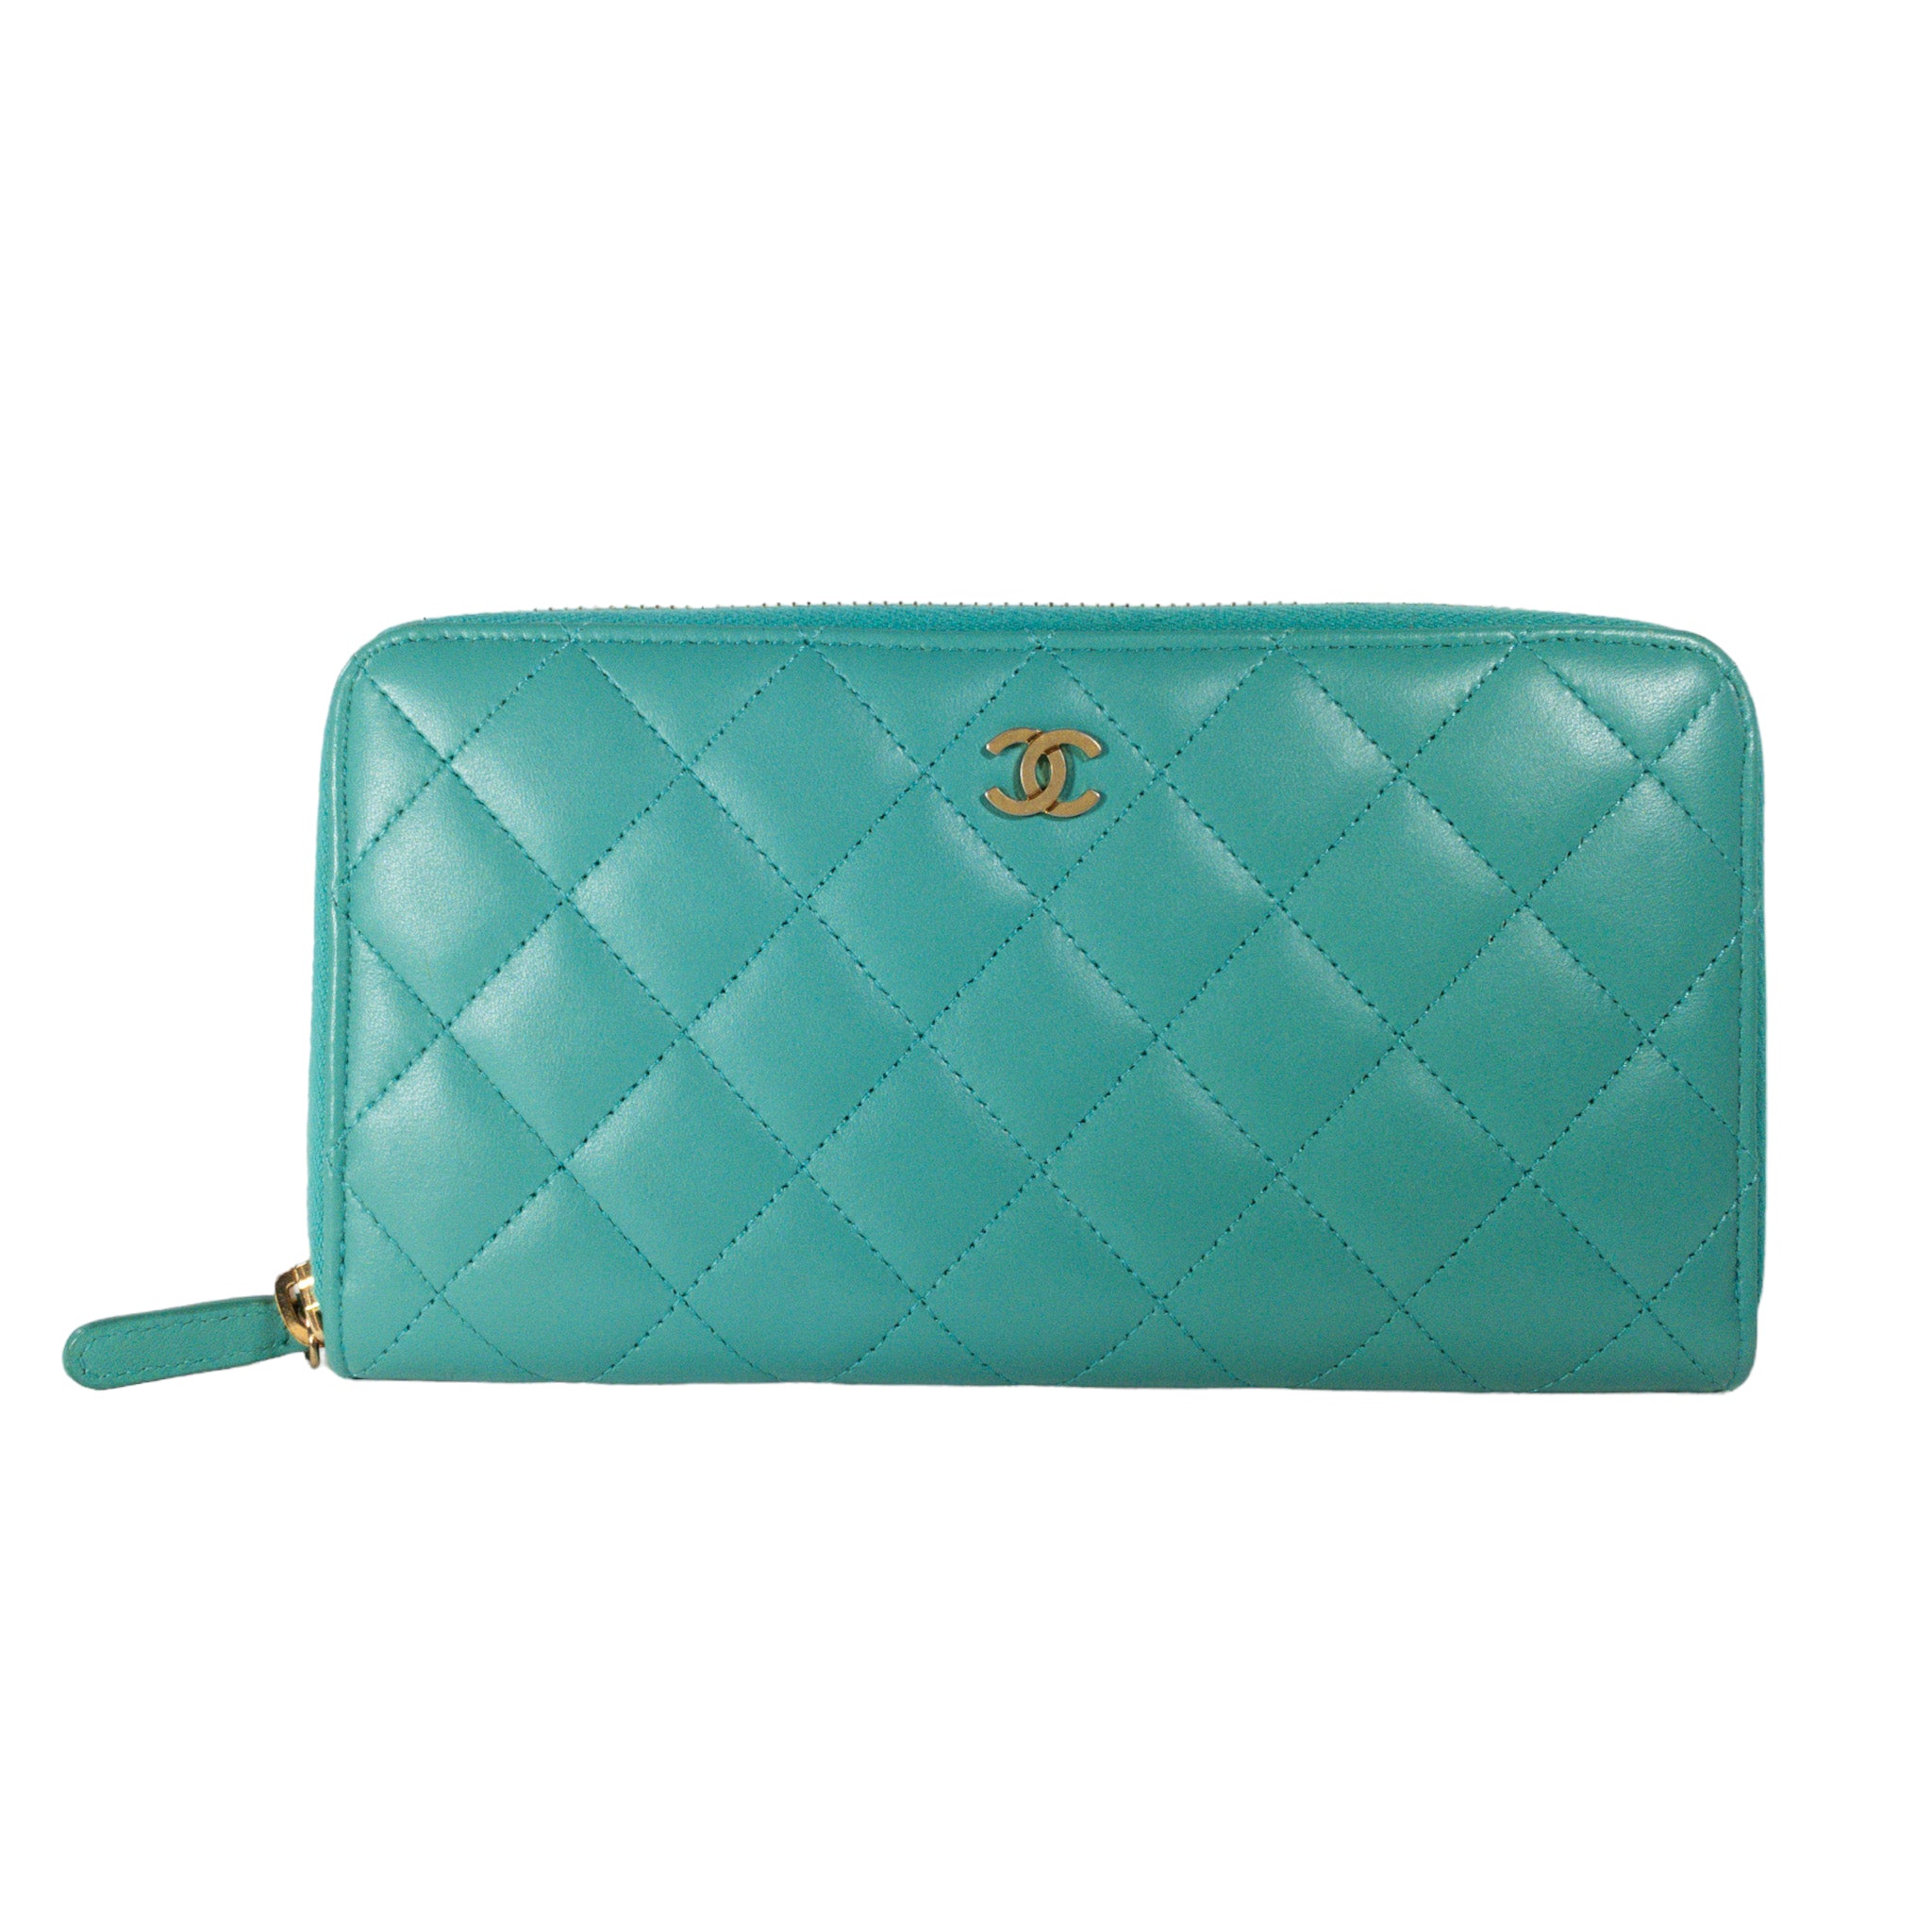 Chanel - Authenticated Wallet - Turquoise for Women, Never Worn, with Tag